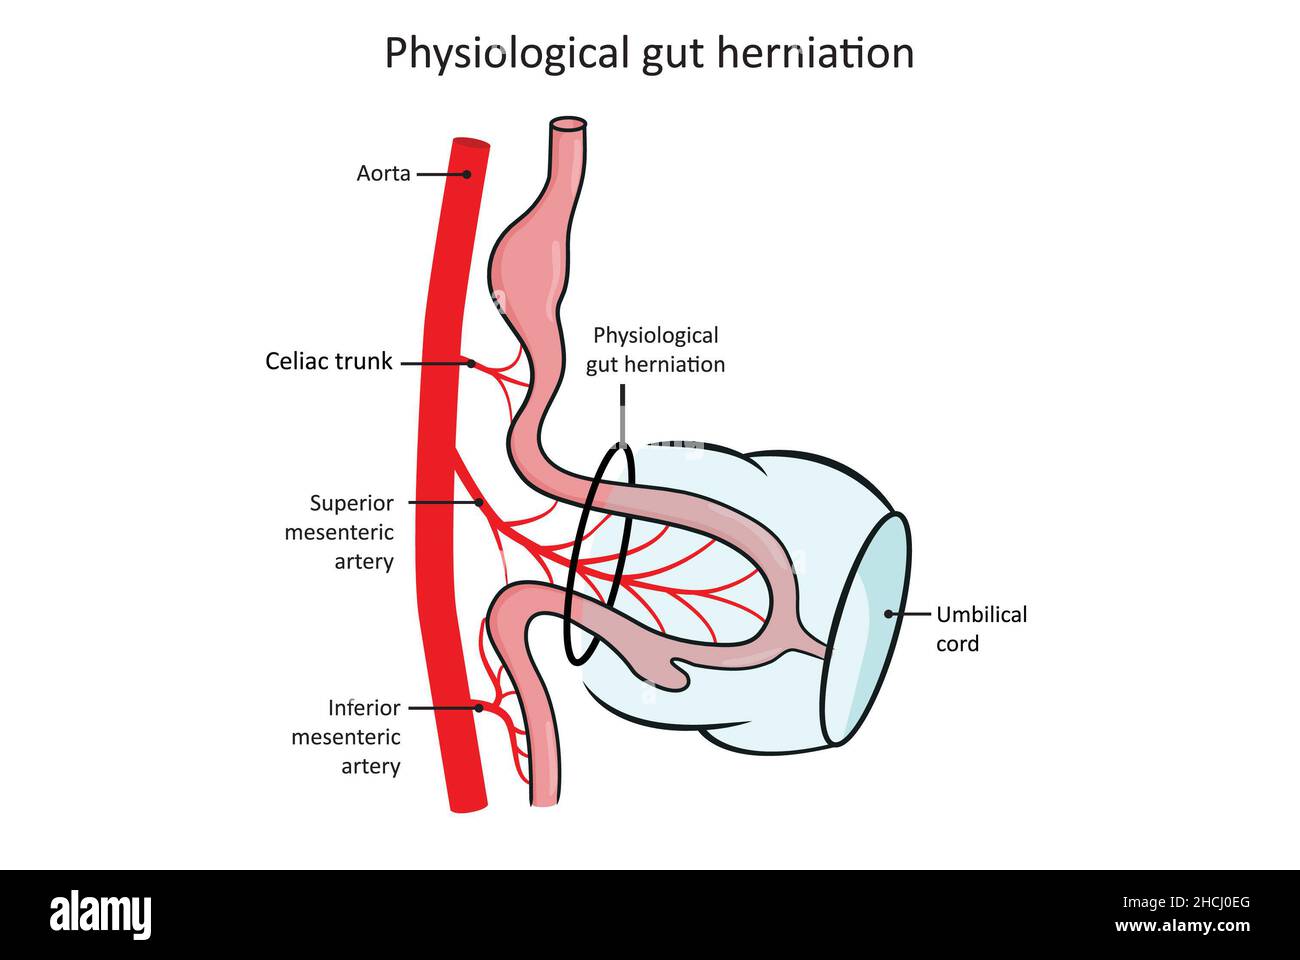 Physiological gut herniation, development of the gastrointestinal (alimentary) tract. Stock Photo